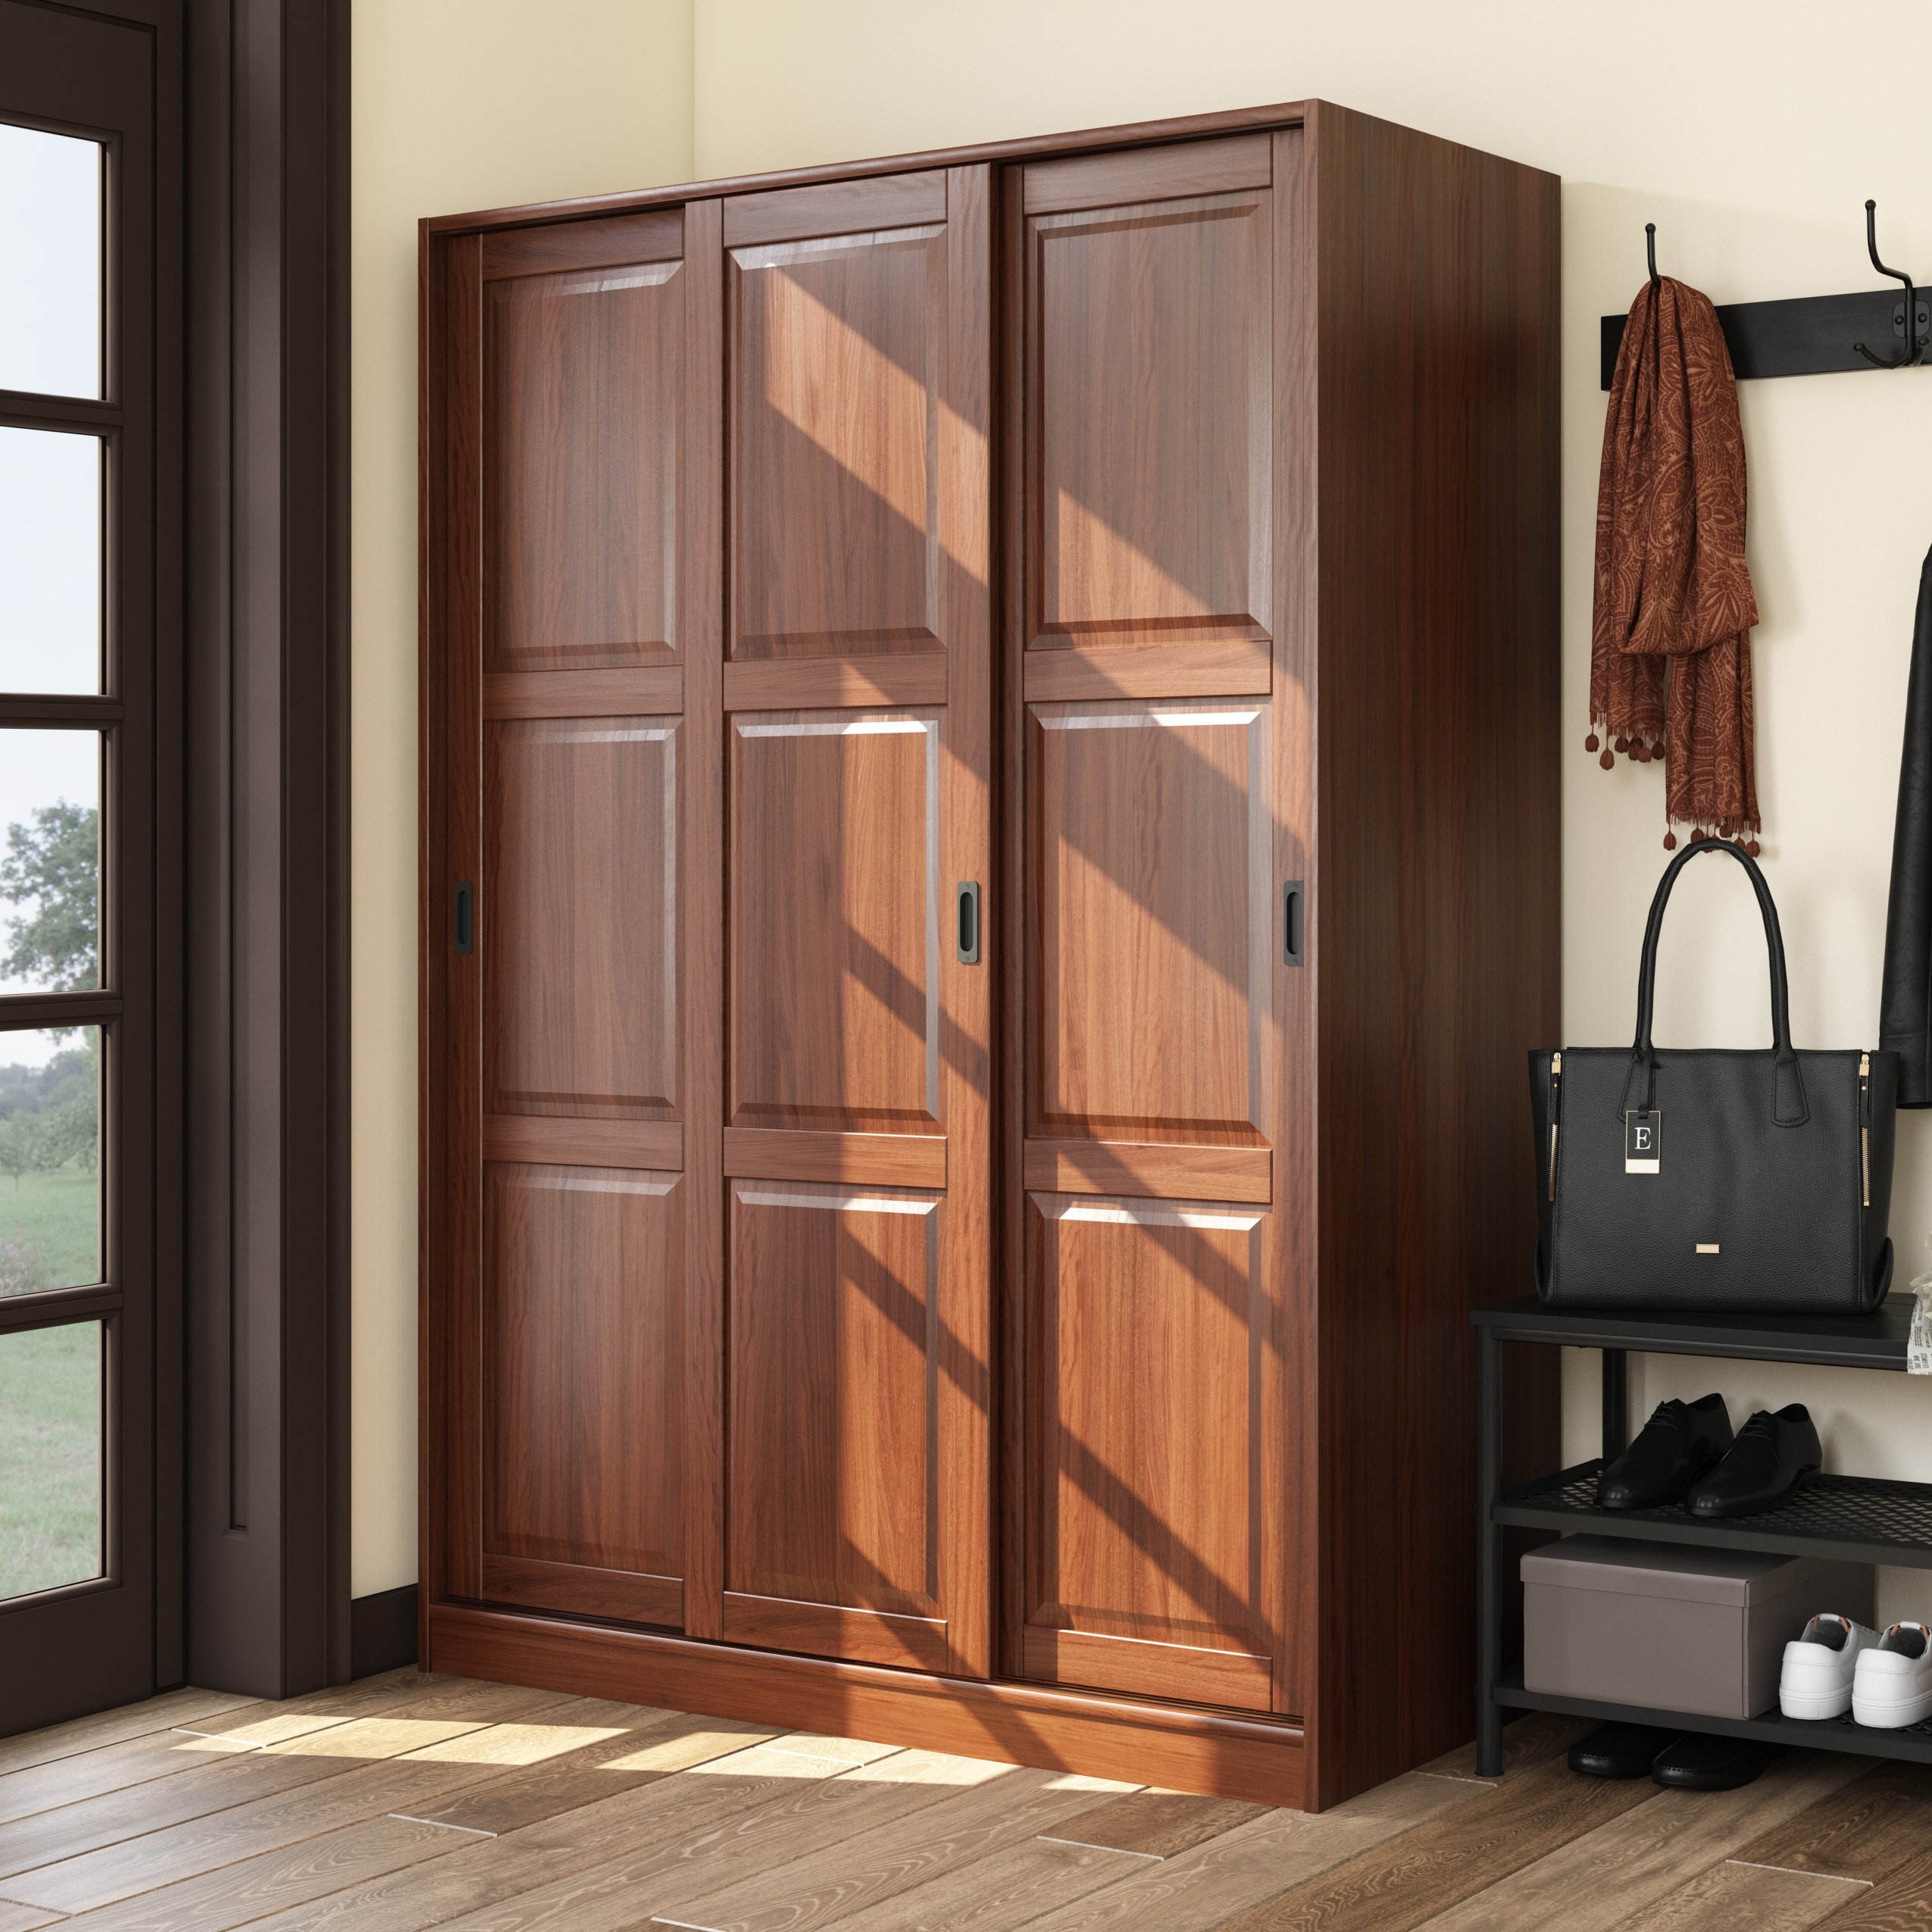 https://ak1.ostkcdn.com/images/products/is/images/direct/2ad837d6c9432aeb1c9d134415bda5c1eae53de7/Palace-Imports-100%25-Solid-Wood-Wall-Closet-System-of-Wardrobe-Armoires-with-Mirrored%2C-Louvered-or-Raised-Panel-Sliding-Doors.jpg